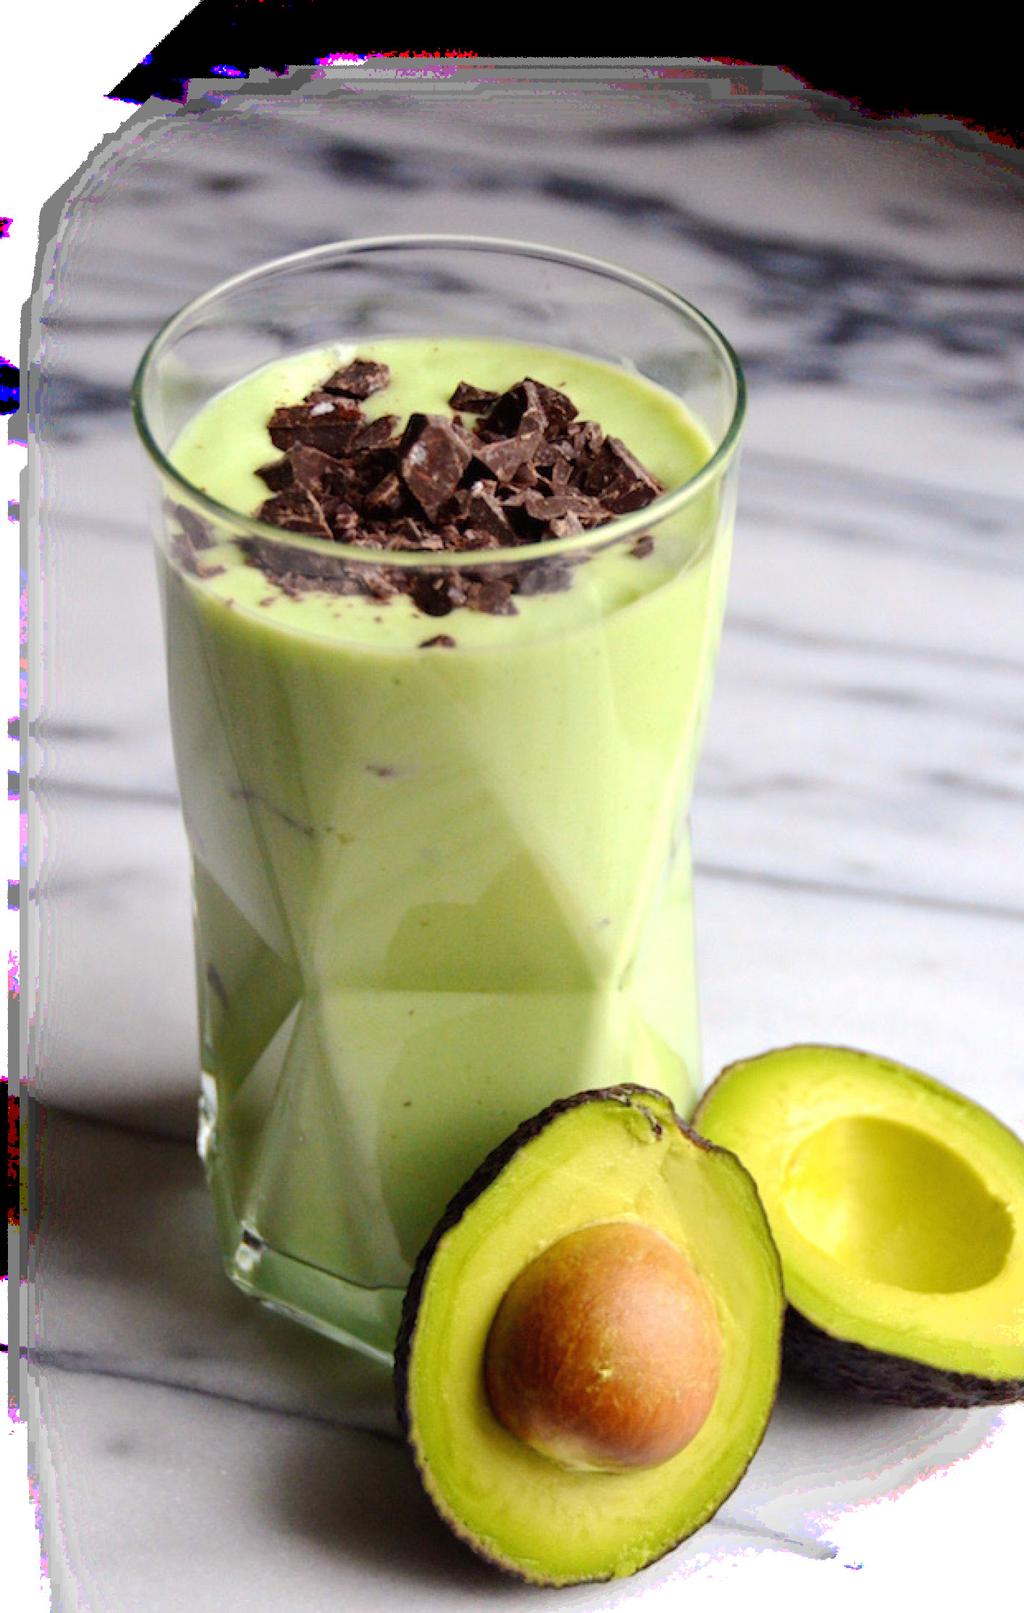 UltraShake TM Recipes Mint Chip Protein Shake 1/2 ripe avocado 6 drops peppermint oil or 1/8 teaspoon peppermint extract Top with dark chocolate (at least 85%), finely chopped or 2 tablespoons raw